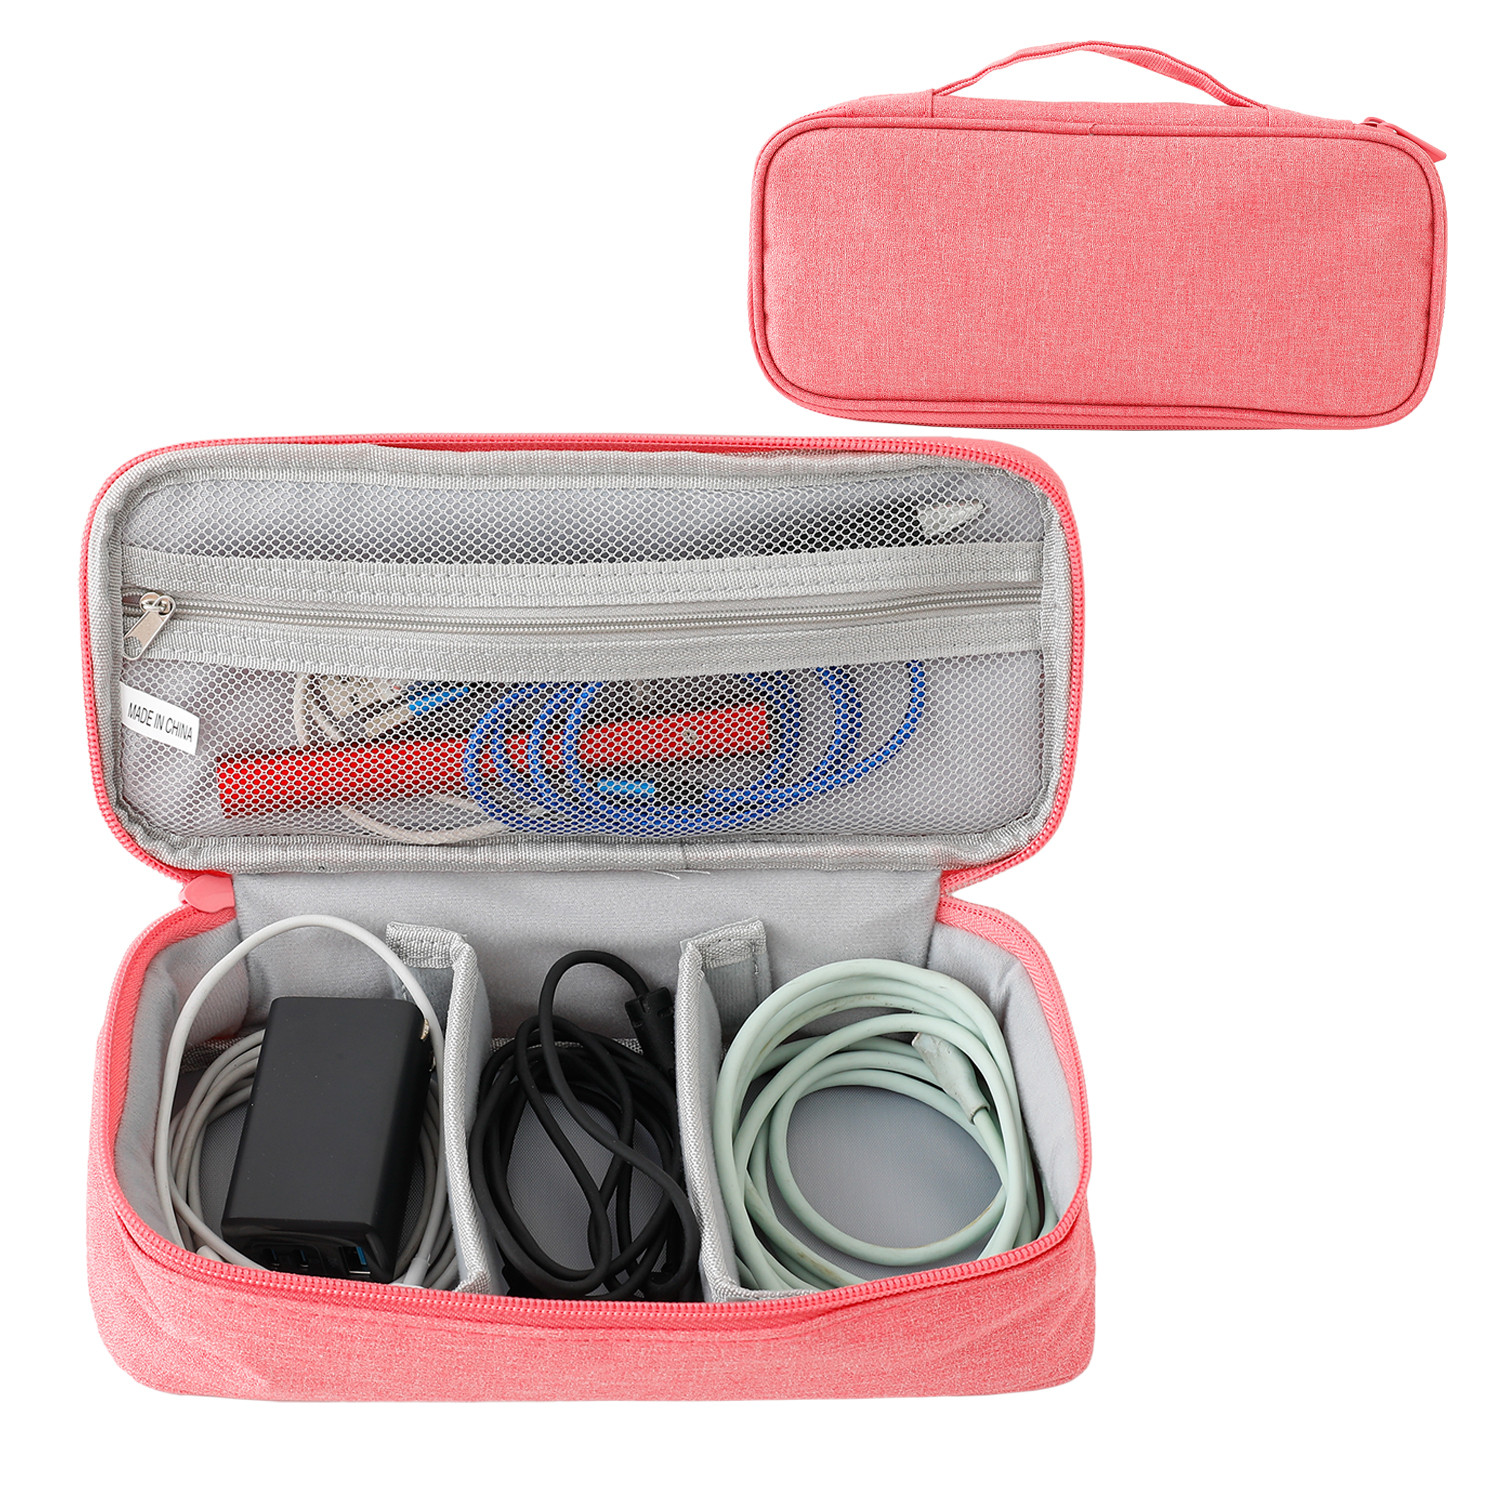 Kuber Industries Travel Organizer For Electronic Accessories|Multipurpose Pouch|Adapter, Cable, Gadget Organizer|Two Comparment With Zipper (Pink Blue)